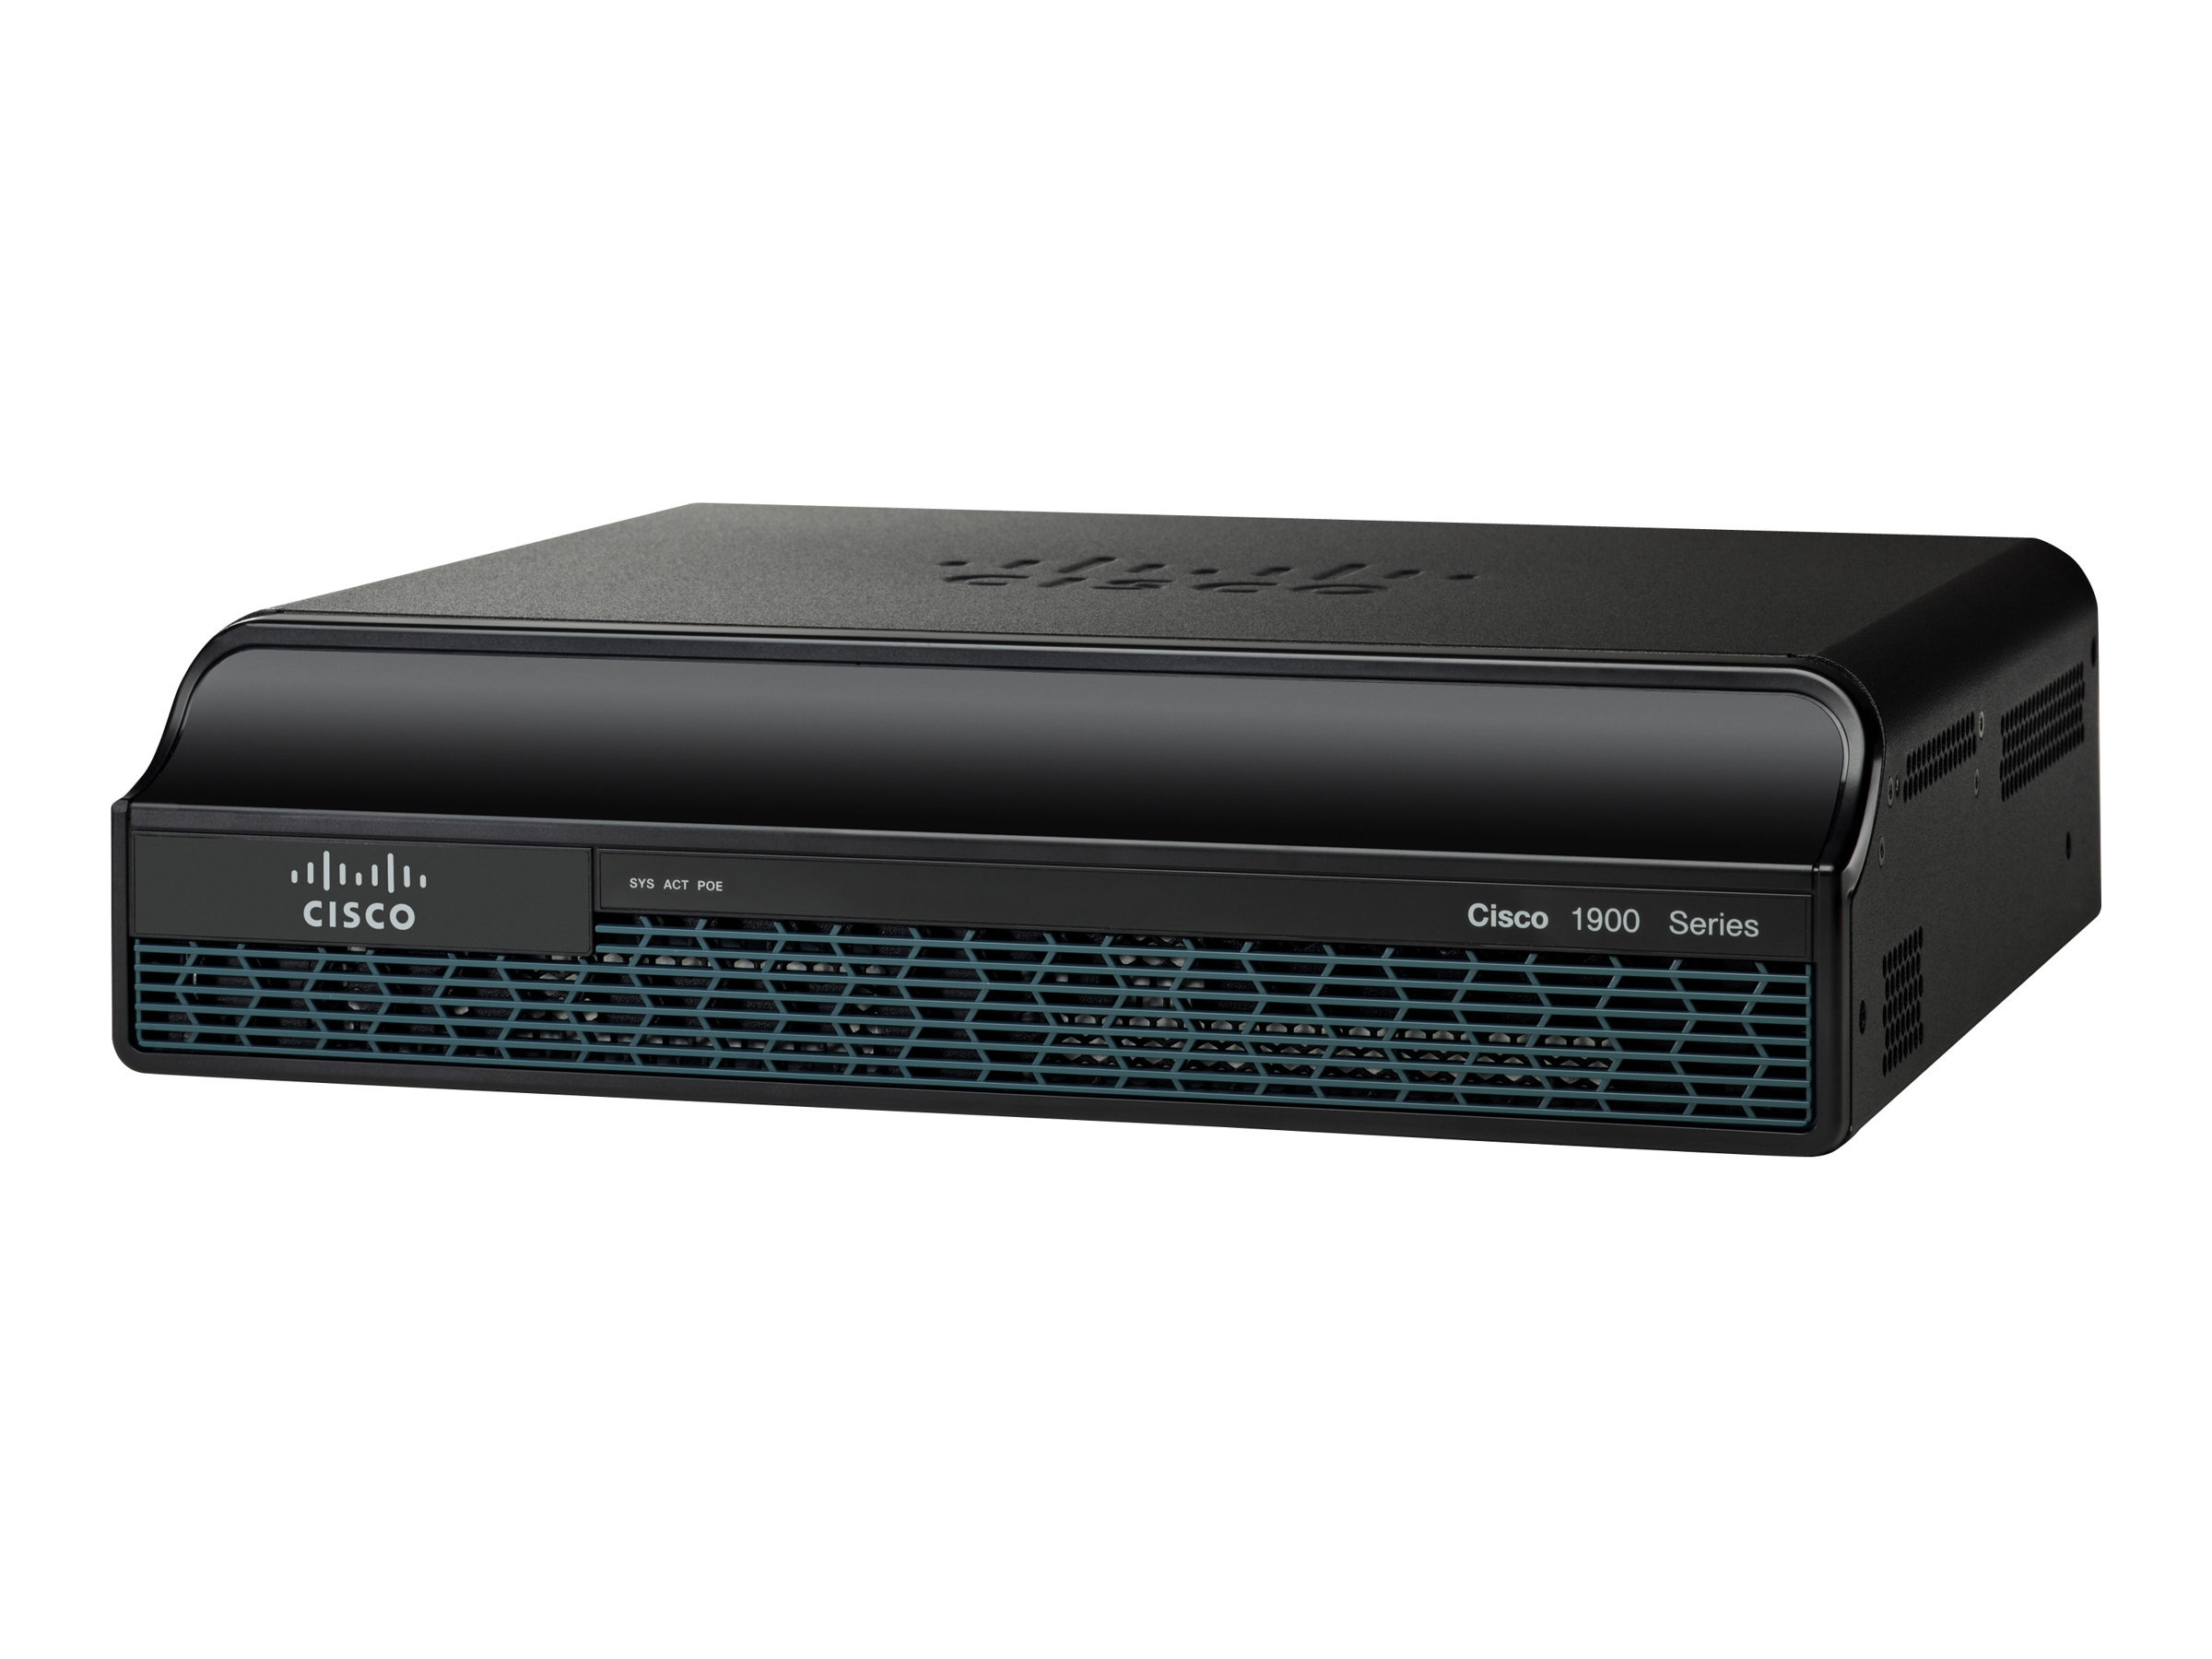 Cisco 1941 - Wireless Router - GigE - 802.11a/b/g/n (draft 2.0)